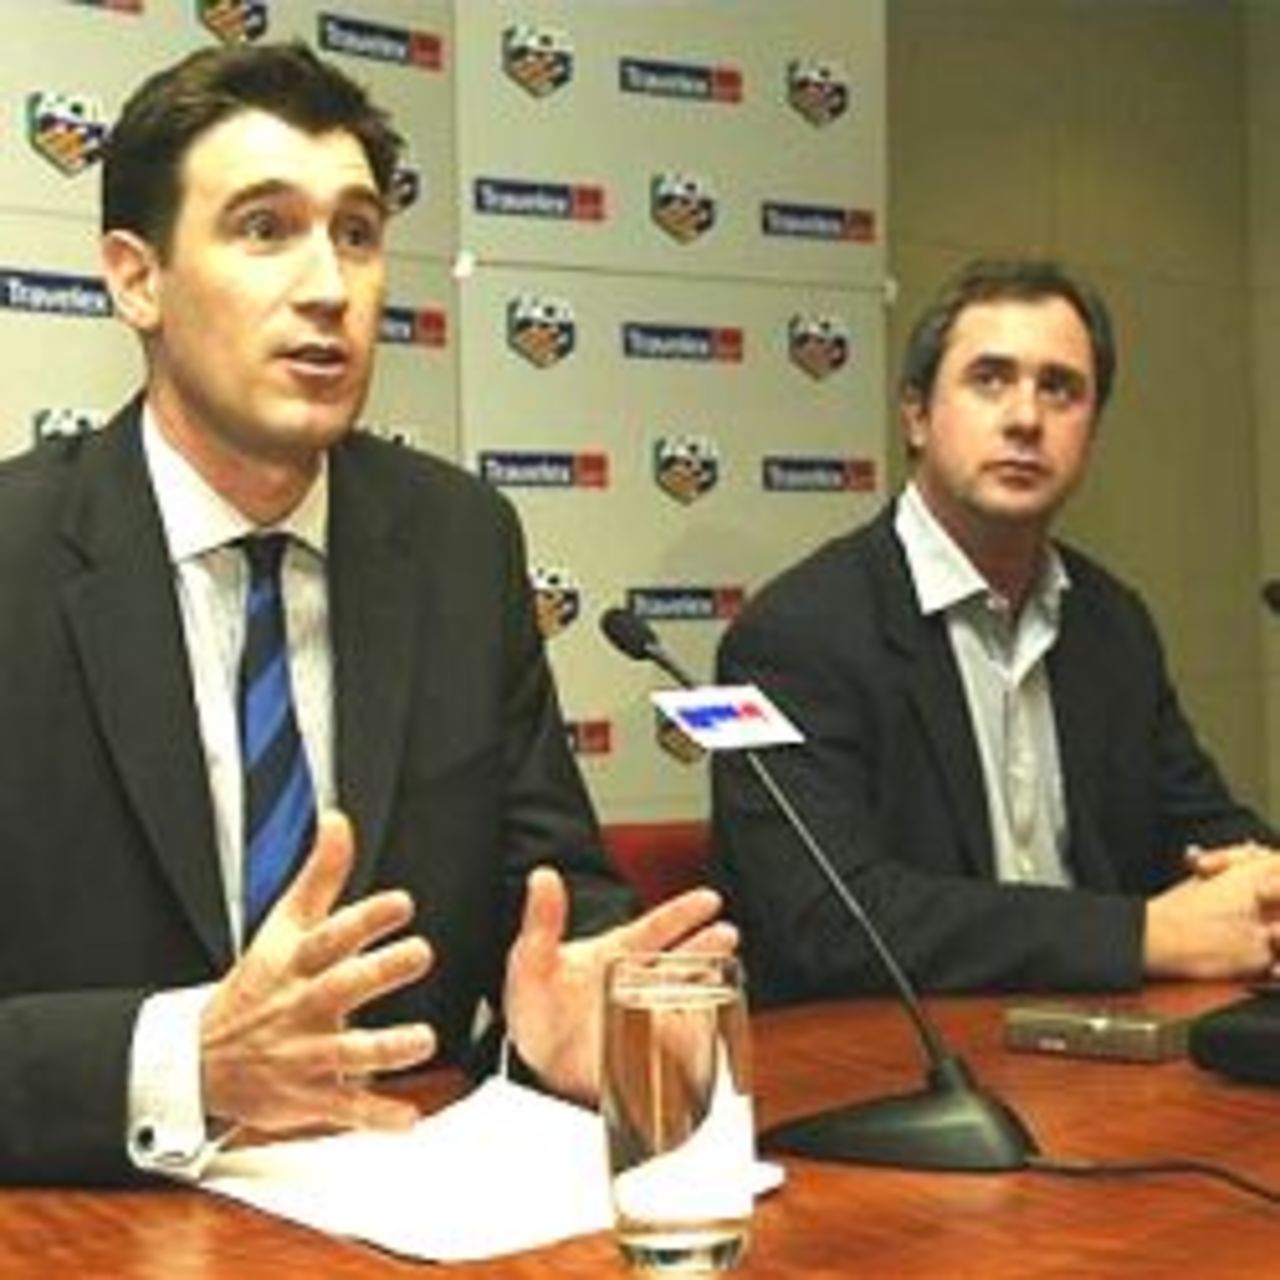 MELBOURNE - AUGUST 22: James Sutherland, Chief Executive of the ACB and Tim May, Chief Executive of the ACA, during an ACB/ACA press conference held at the ACB Office, Melbourne, Australia on August 22, 2002.